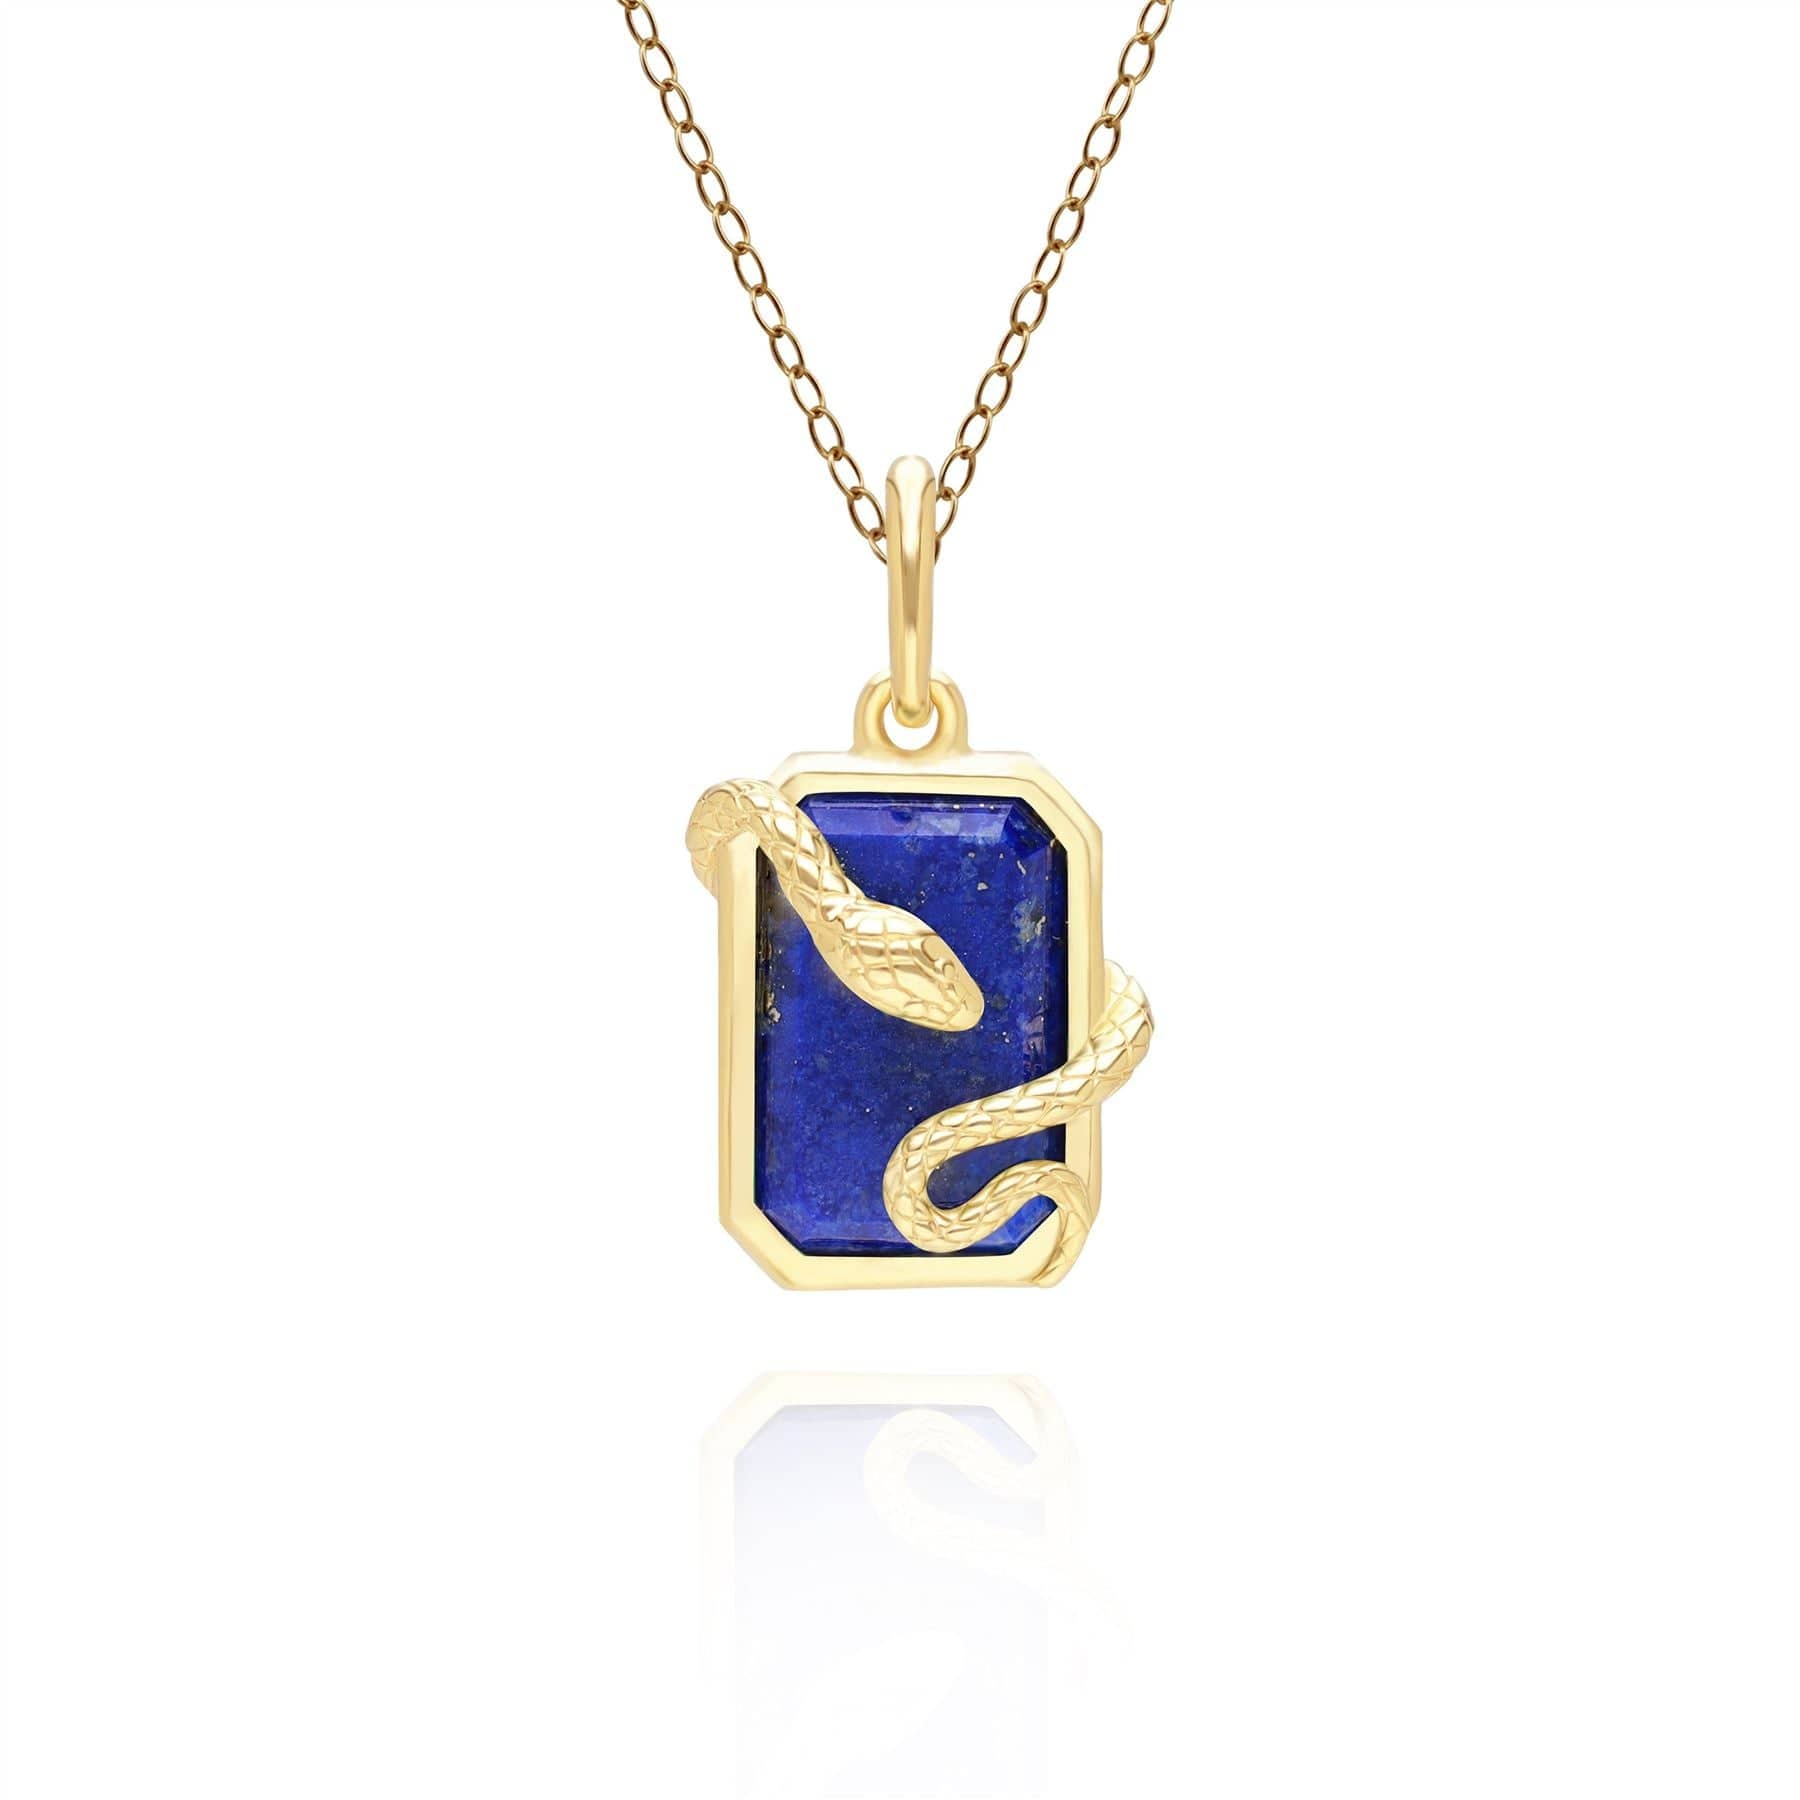 Grand Deco Lapis Lazuli Snake Wrap Pendant in Gold Plated Sterling Silver - Gemondo